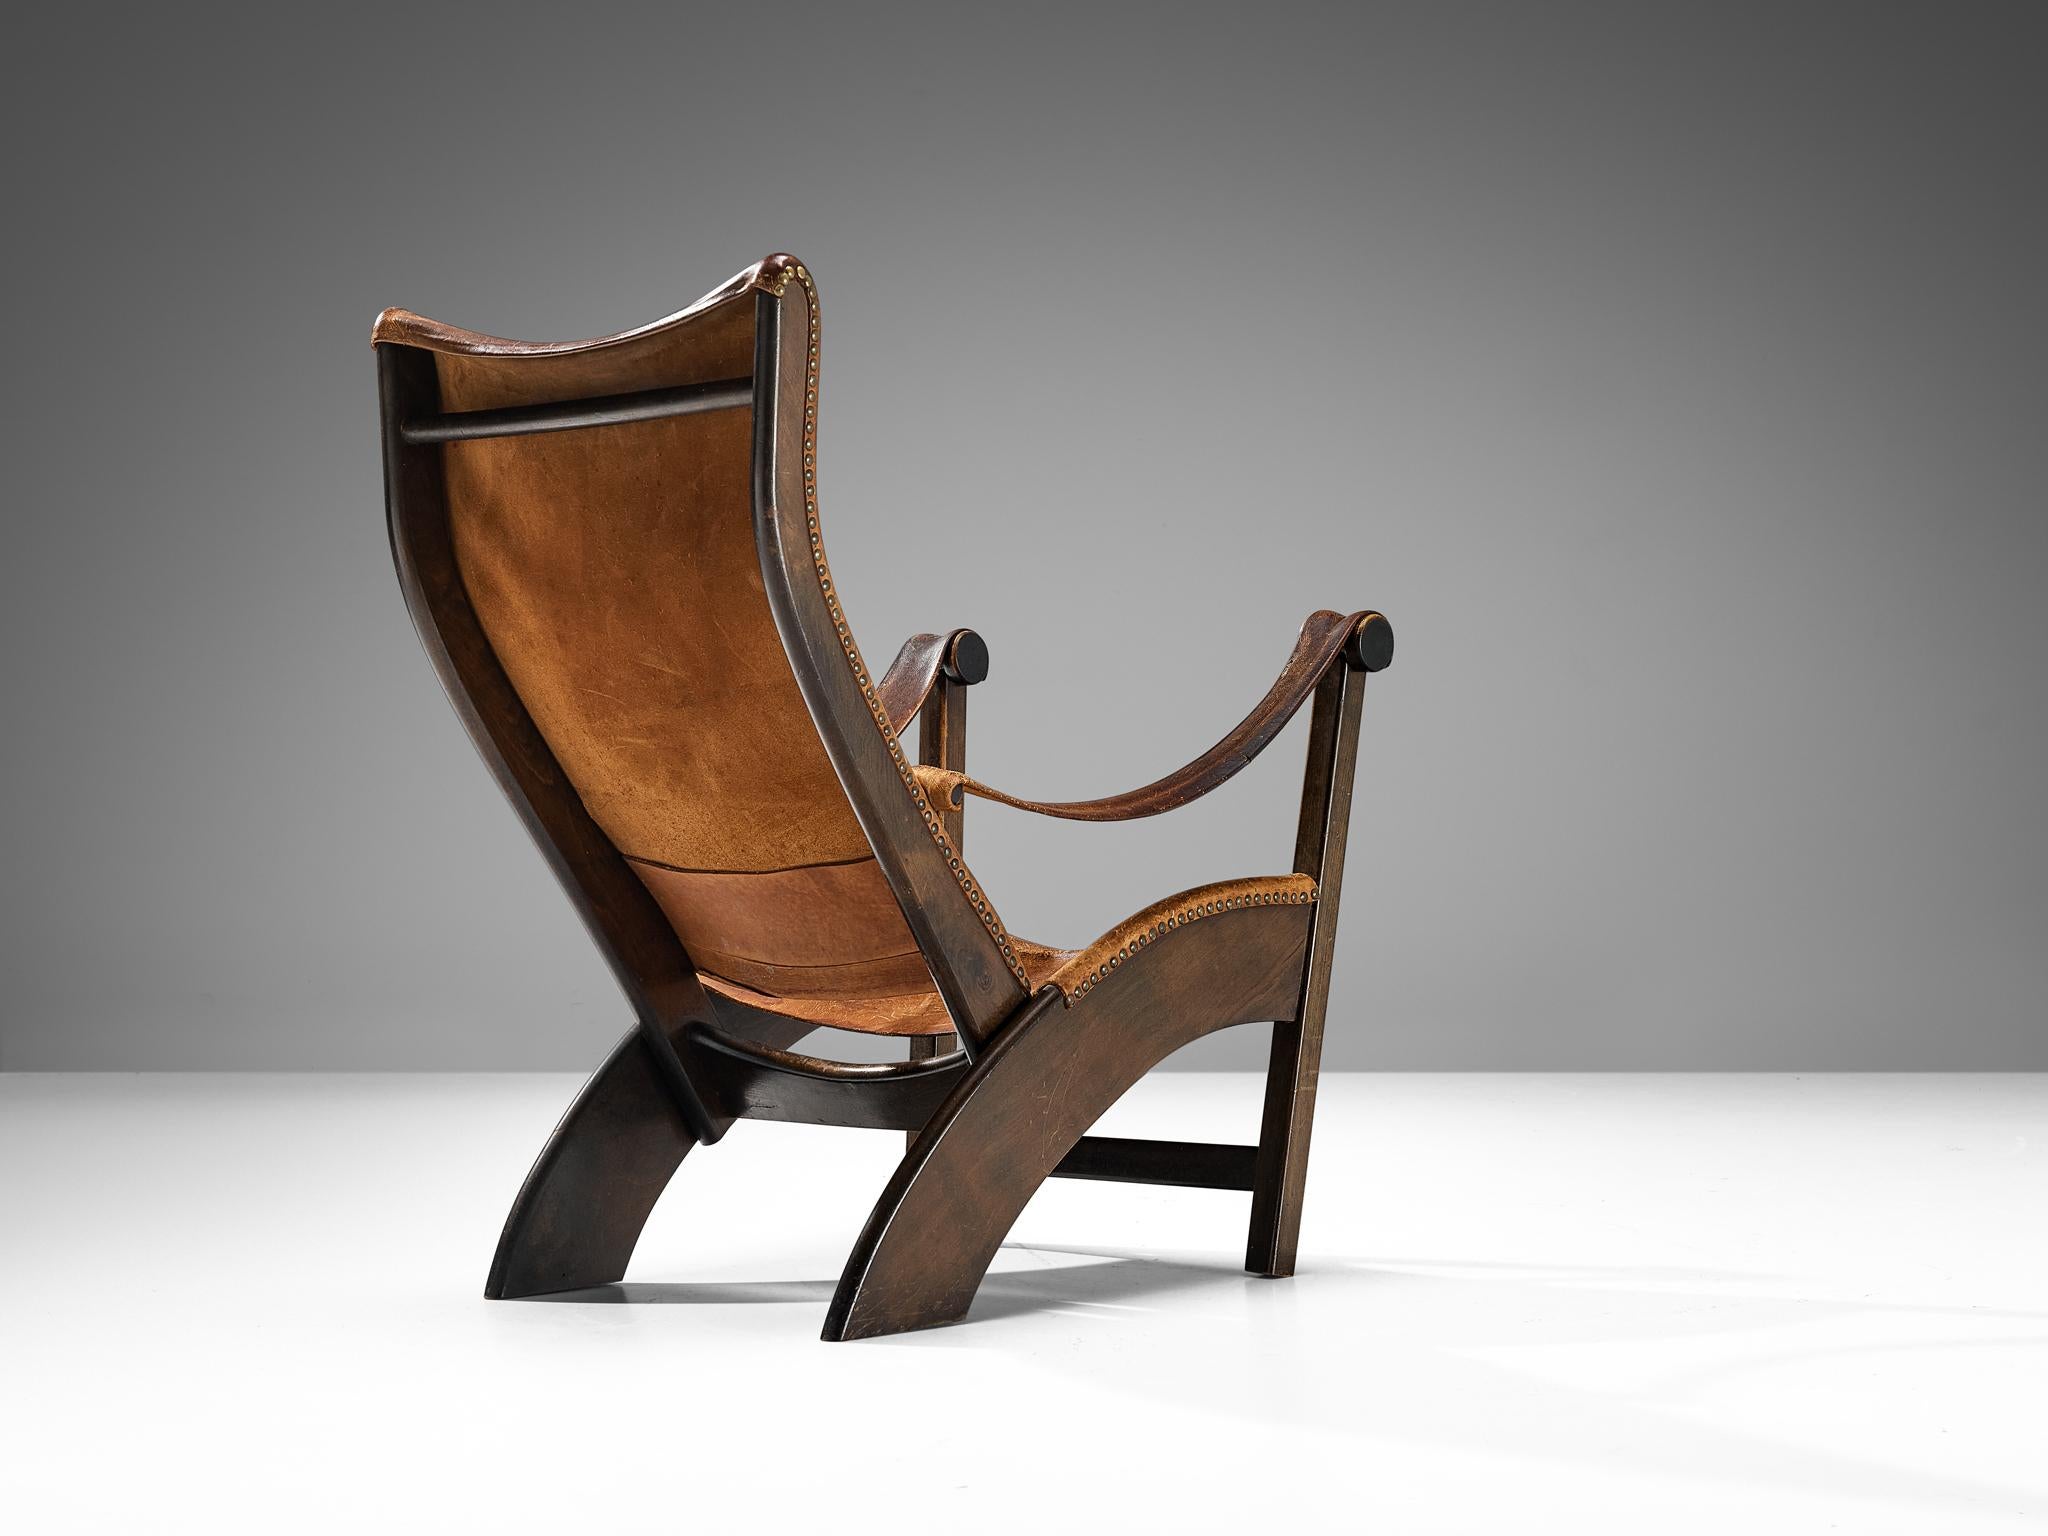 Mogens Voltelen for Niels Vodder, lounge chair model ‘Copenhagen', beech, patinated leather, brass, Denmark, design 1936

The ‘Copenhagen’ lounge chair was designed by Mogens Voltelen in 1936. The 'Copenhagen' model was first presented at The